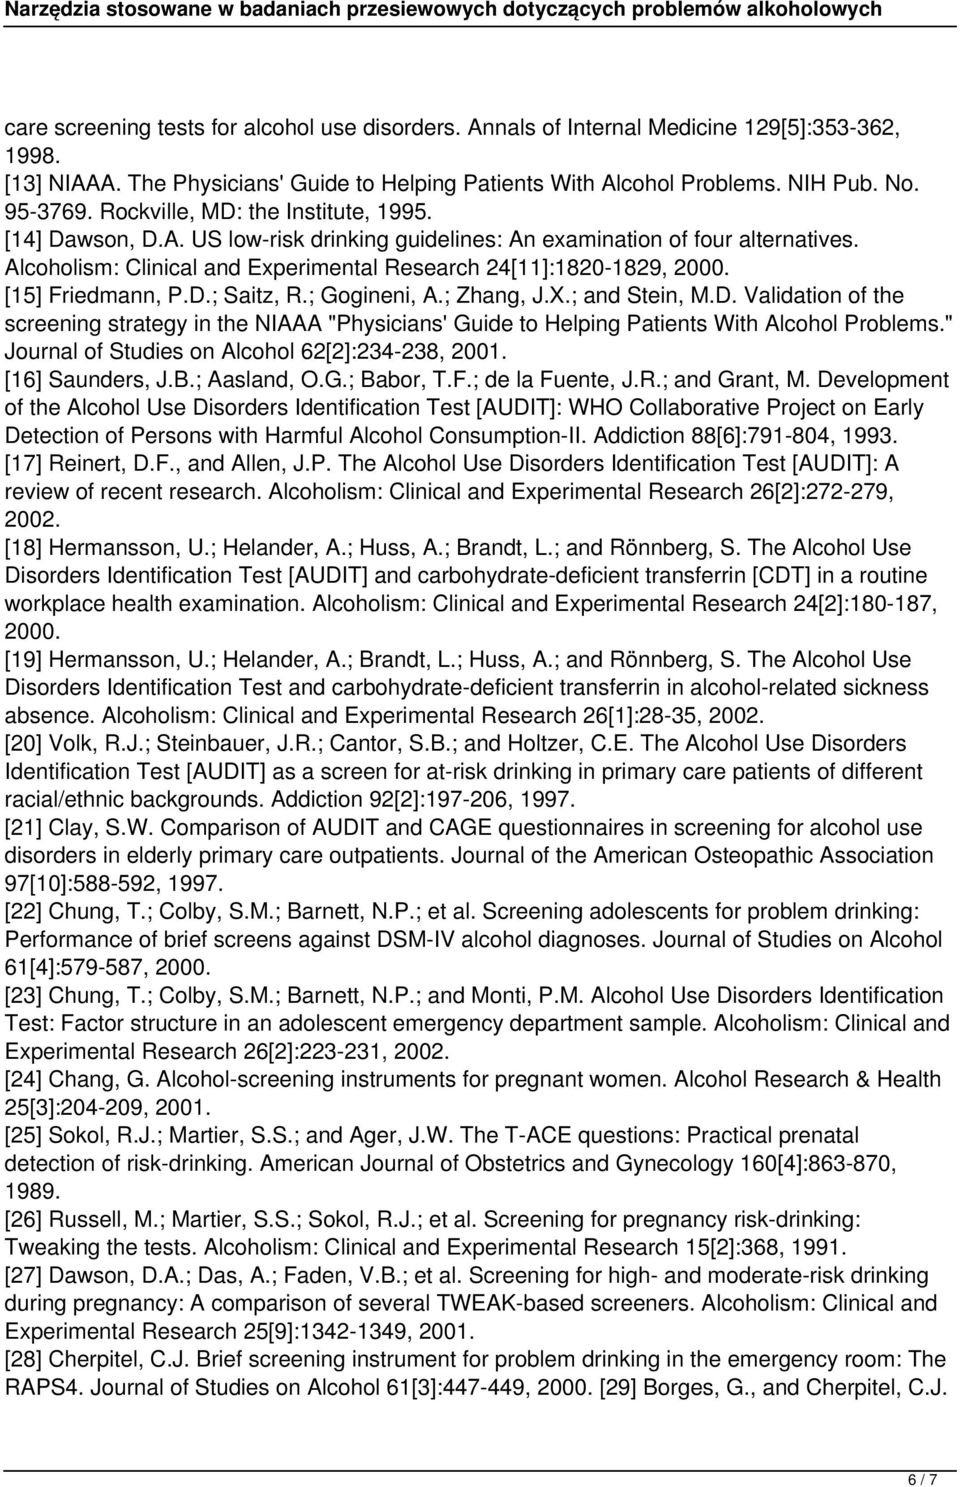 [15] Friedmann, P.D.; Saitz, R.; Gogineni, A.; Zhang, J.X.; and Stein, M.D. Validation of the screening strategy in the NIAAA "Physicians' Guide to Helping Patients With Alcohol Problems.